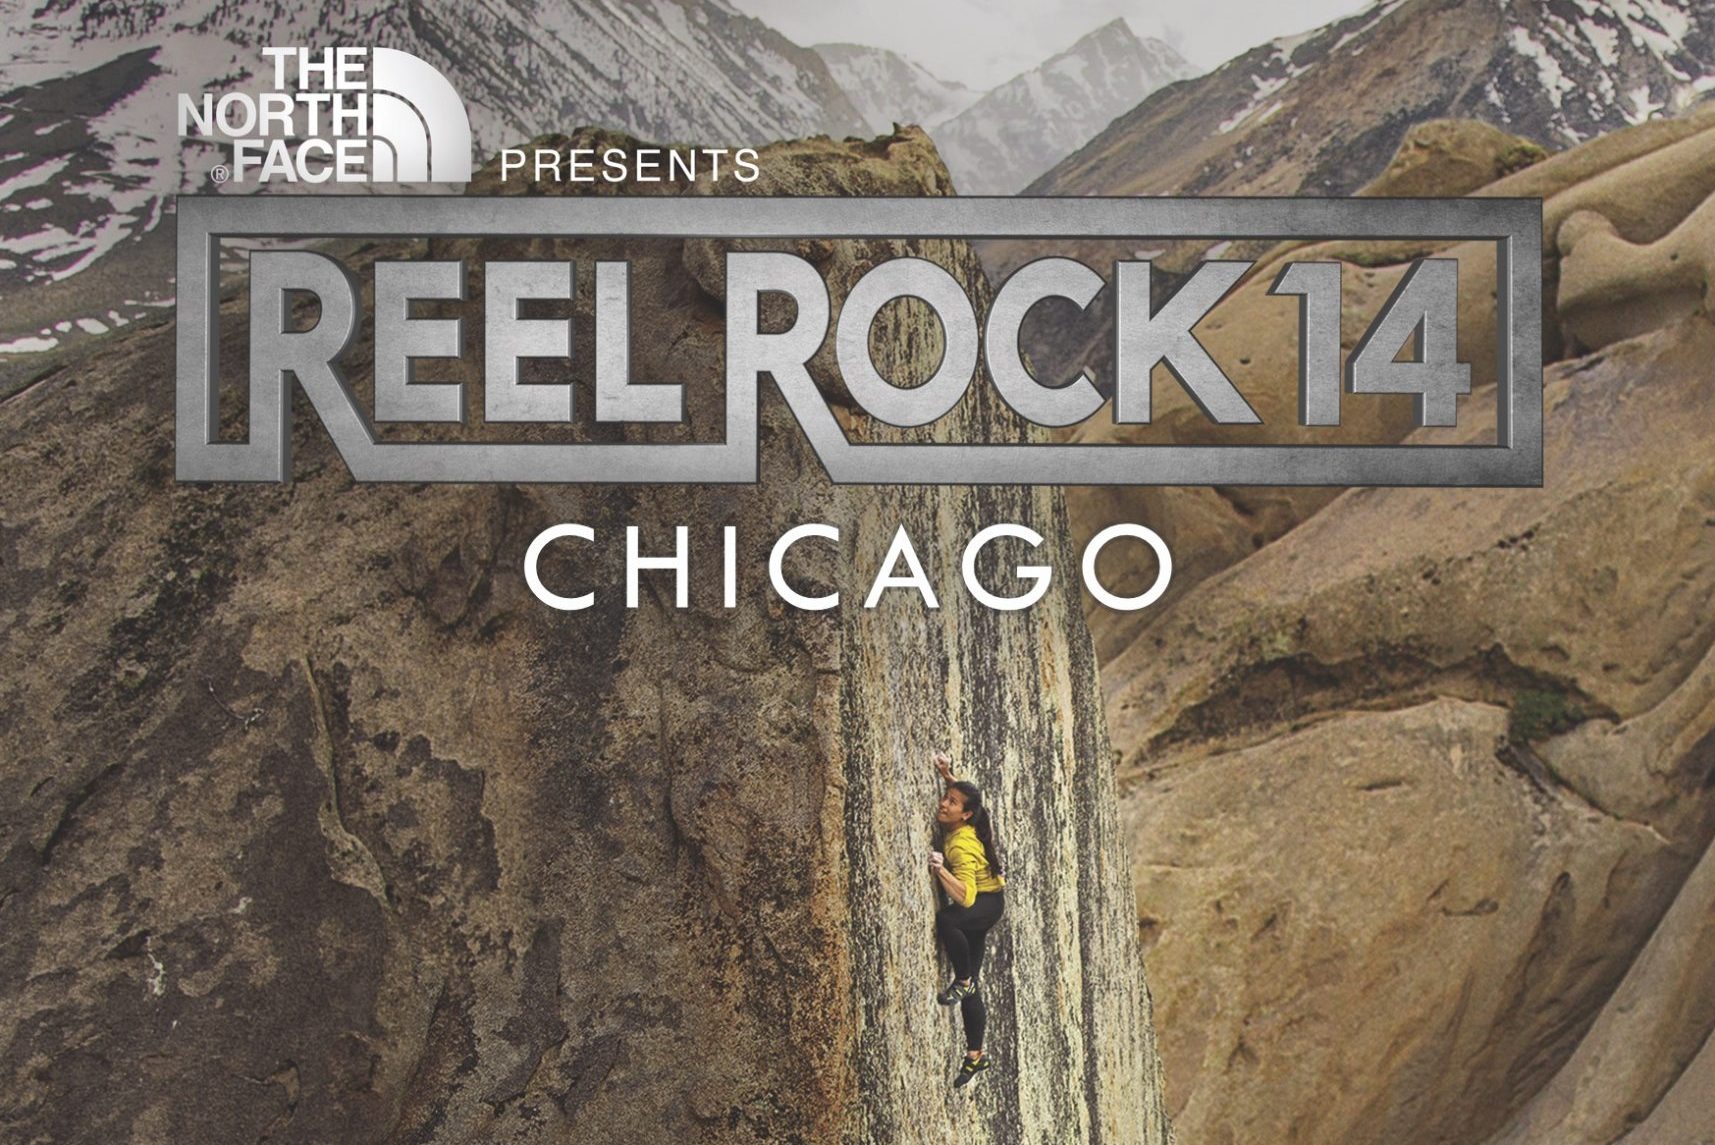 Reel Rock 14 is coming to Chicago - First Ascent Climbing and Fitness